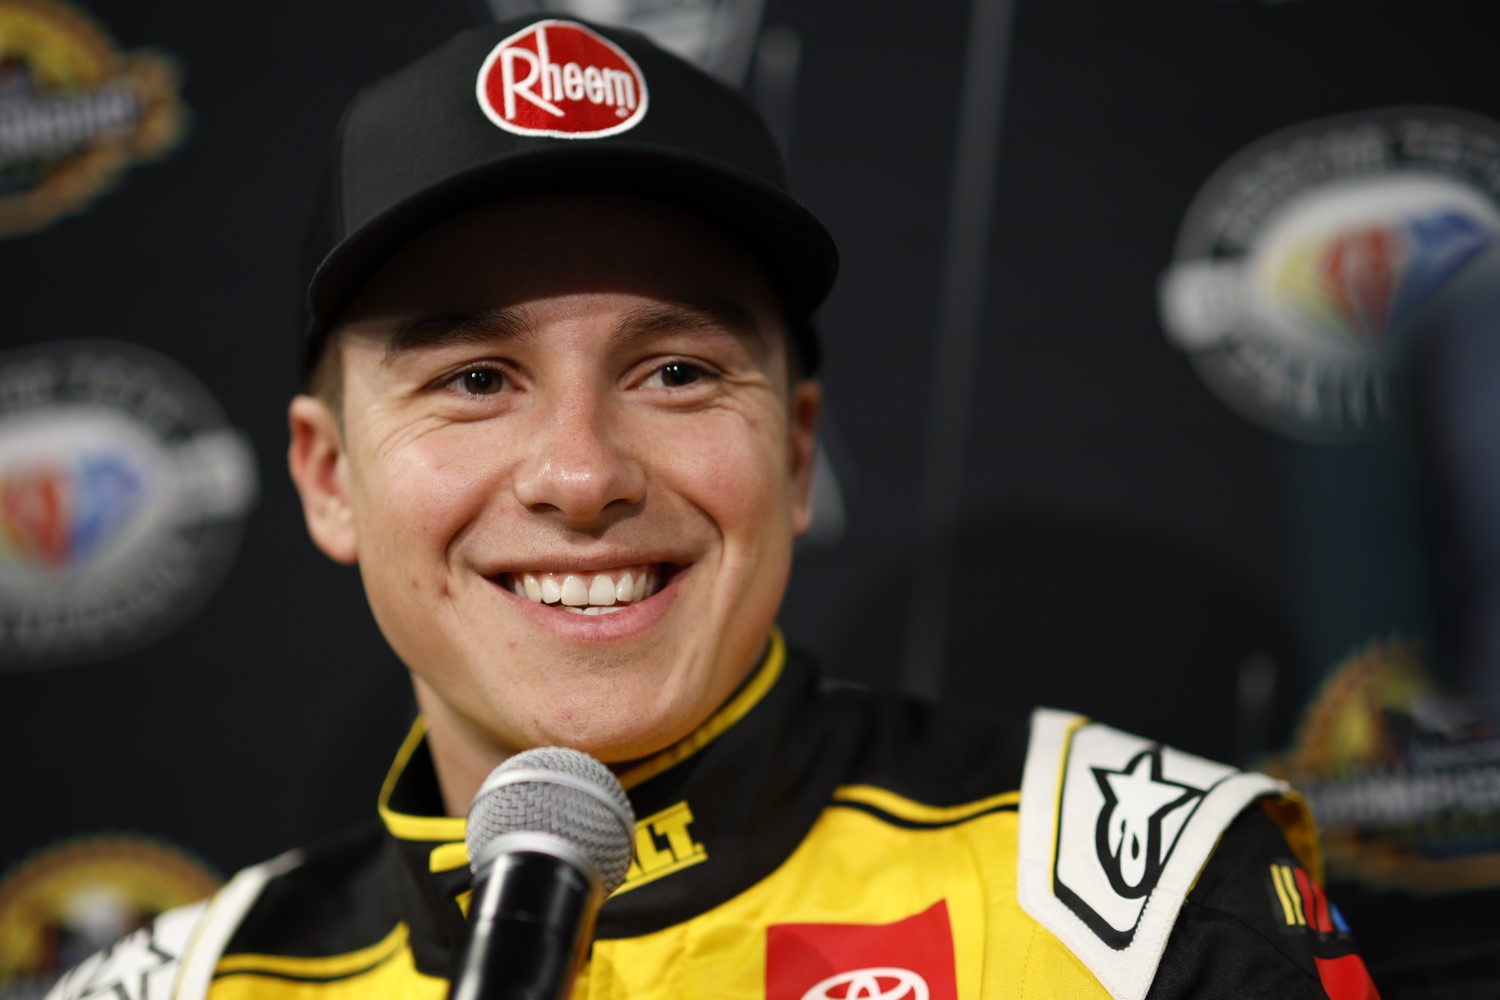 Christopher Bell, driver of the #20 DEWALT Toyota, speaks to the media during the NASCAR Championship Media Day at Phoenix Raceway on November 02, 2023 in Avondale, Arizona. (Photo by Sean Gardner/Getty Images)